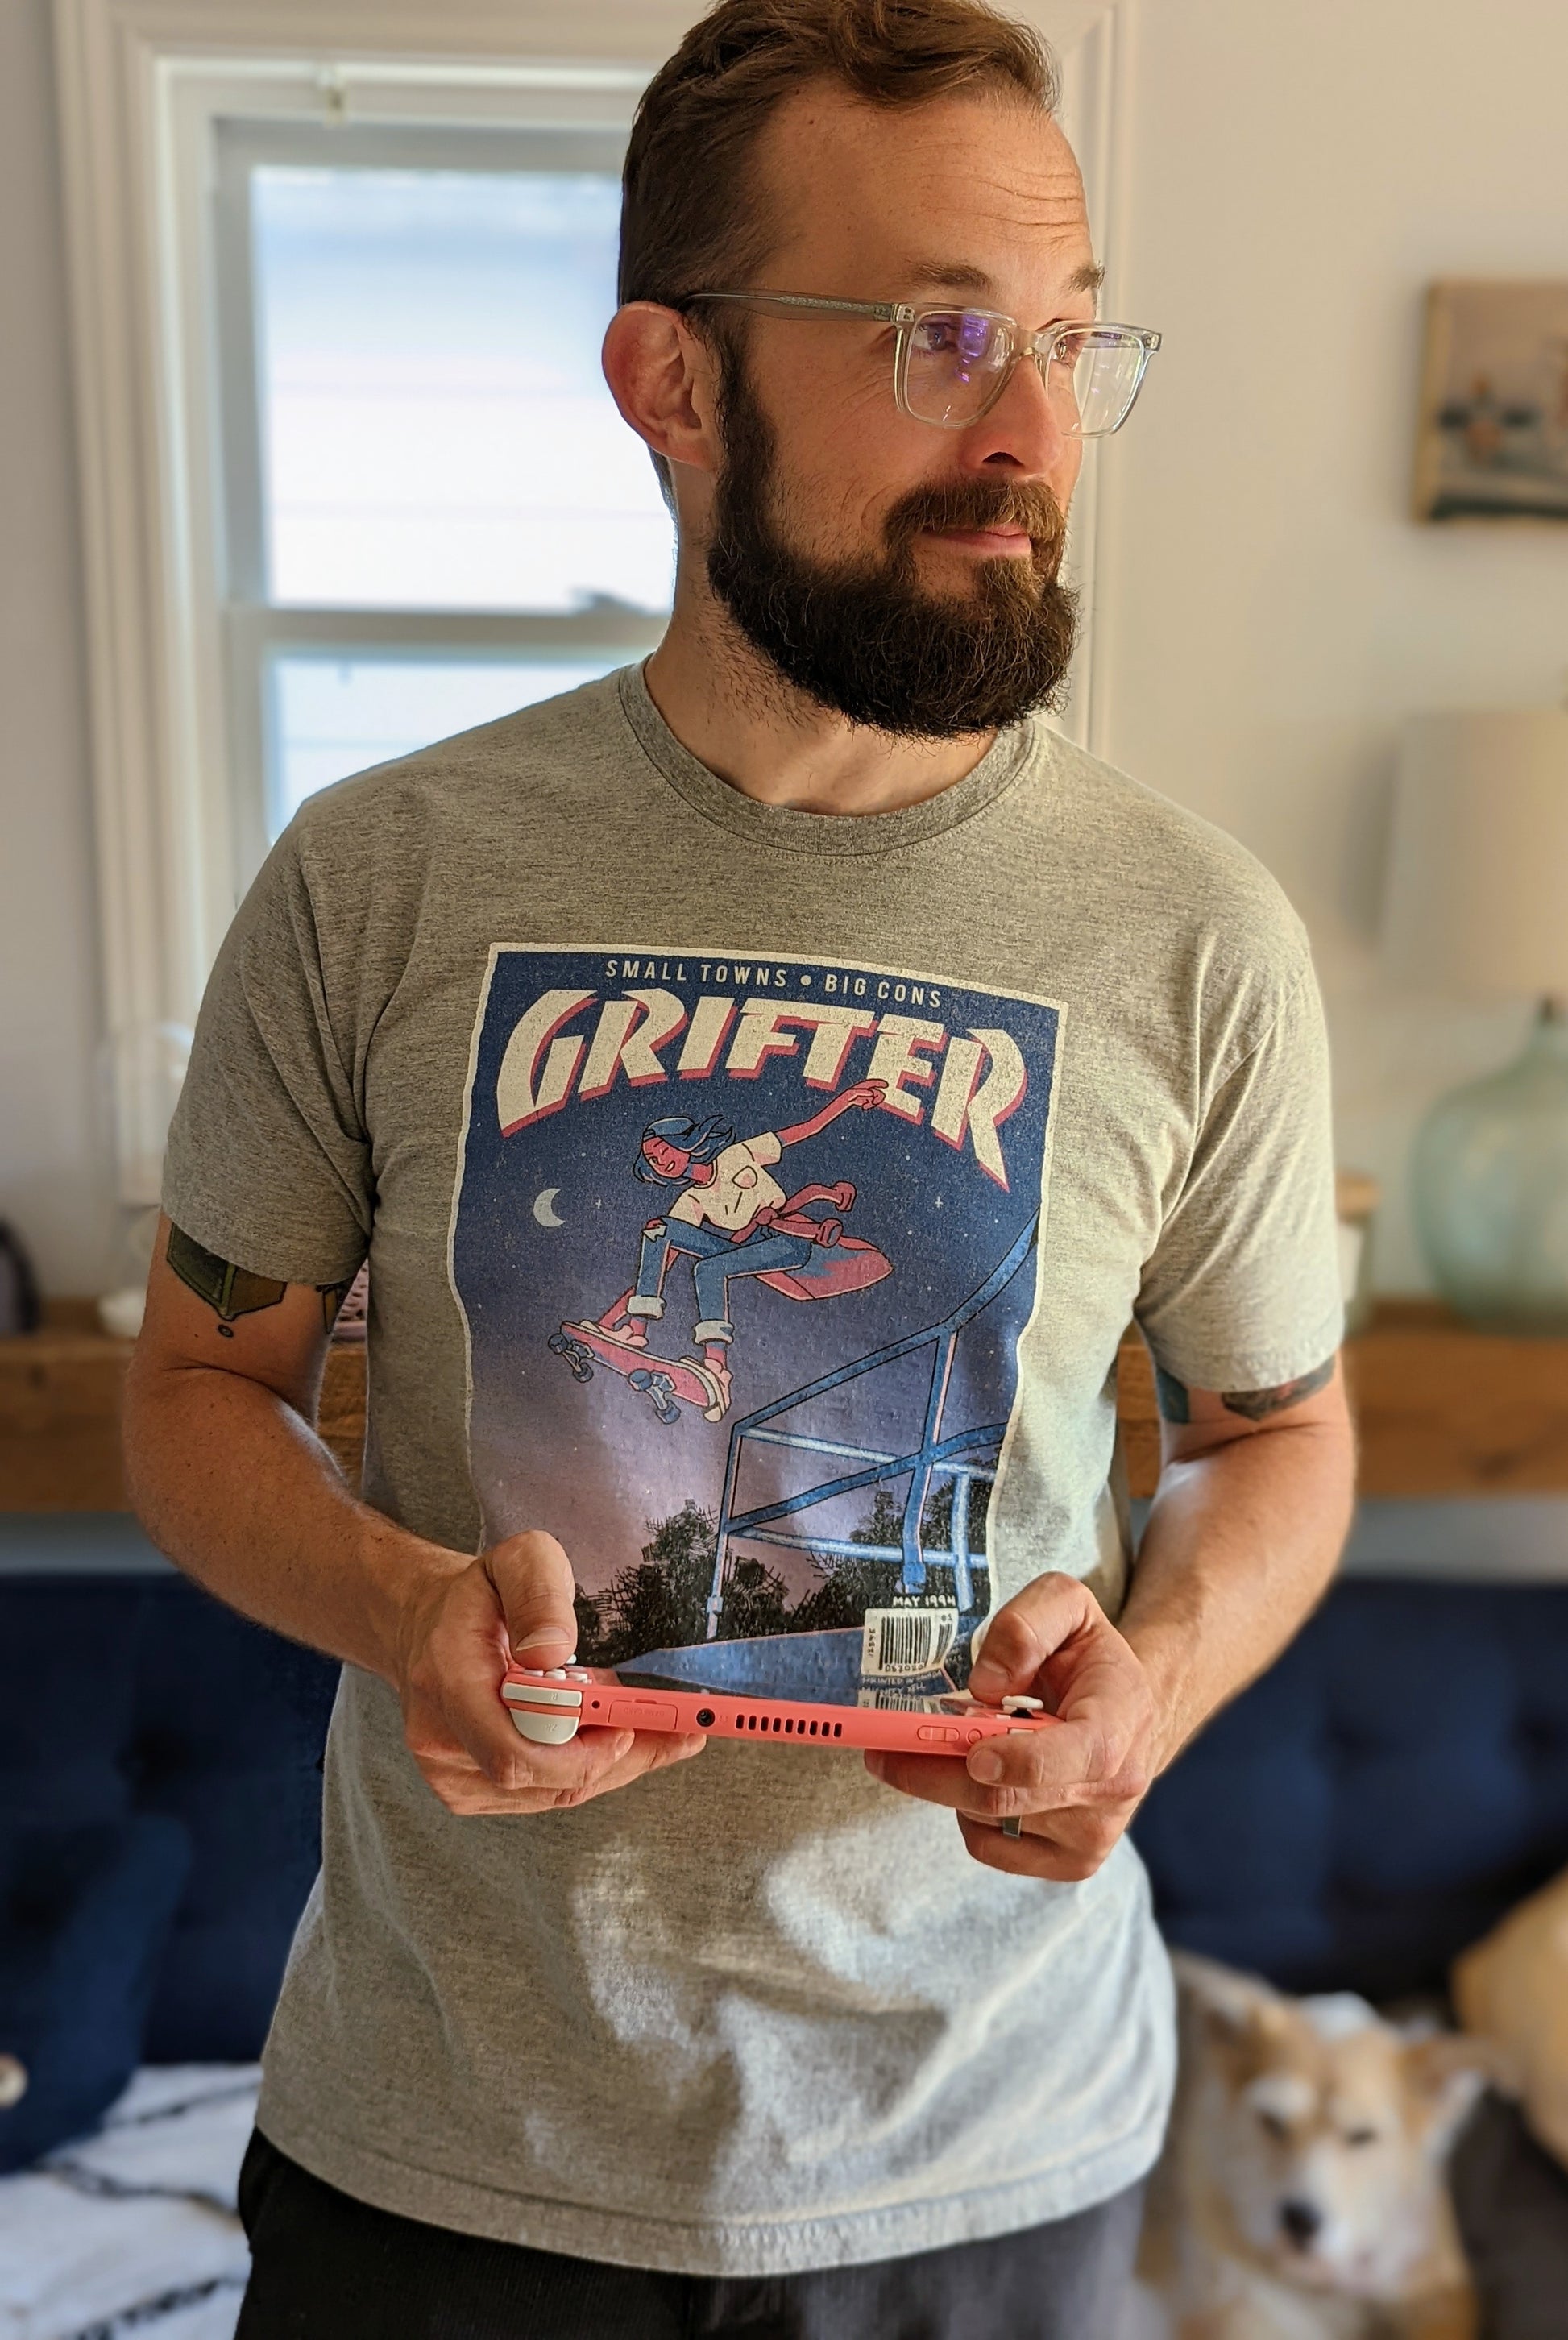 A t-shirt that says "GRIFTER," stylized like an old THRASHER magazine cover, featuring Ali from The Big Con jumping on a skateboard over some stairs. Light heathered grey shirt, with the image stylized like a magazine cover in rectangle on the front of the shirt. Magazine cover colours are largely Blue, light blue, and pink, like a stylized night sky. The magazine cover has a distressed look, like an old print.